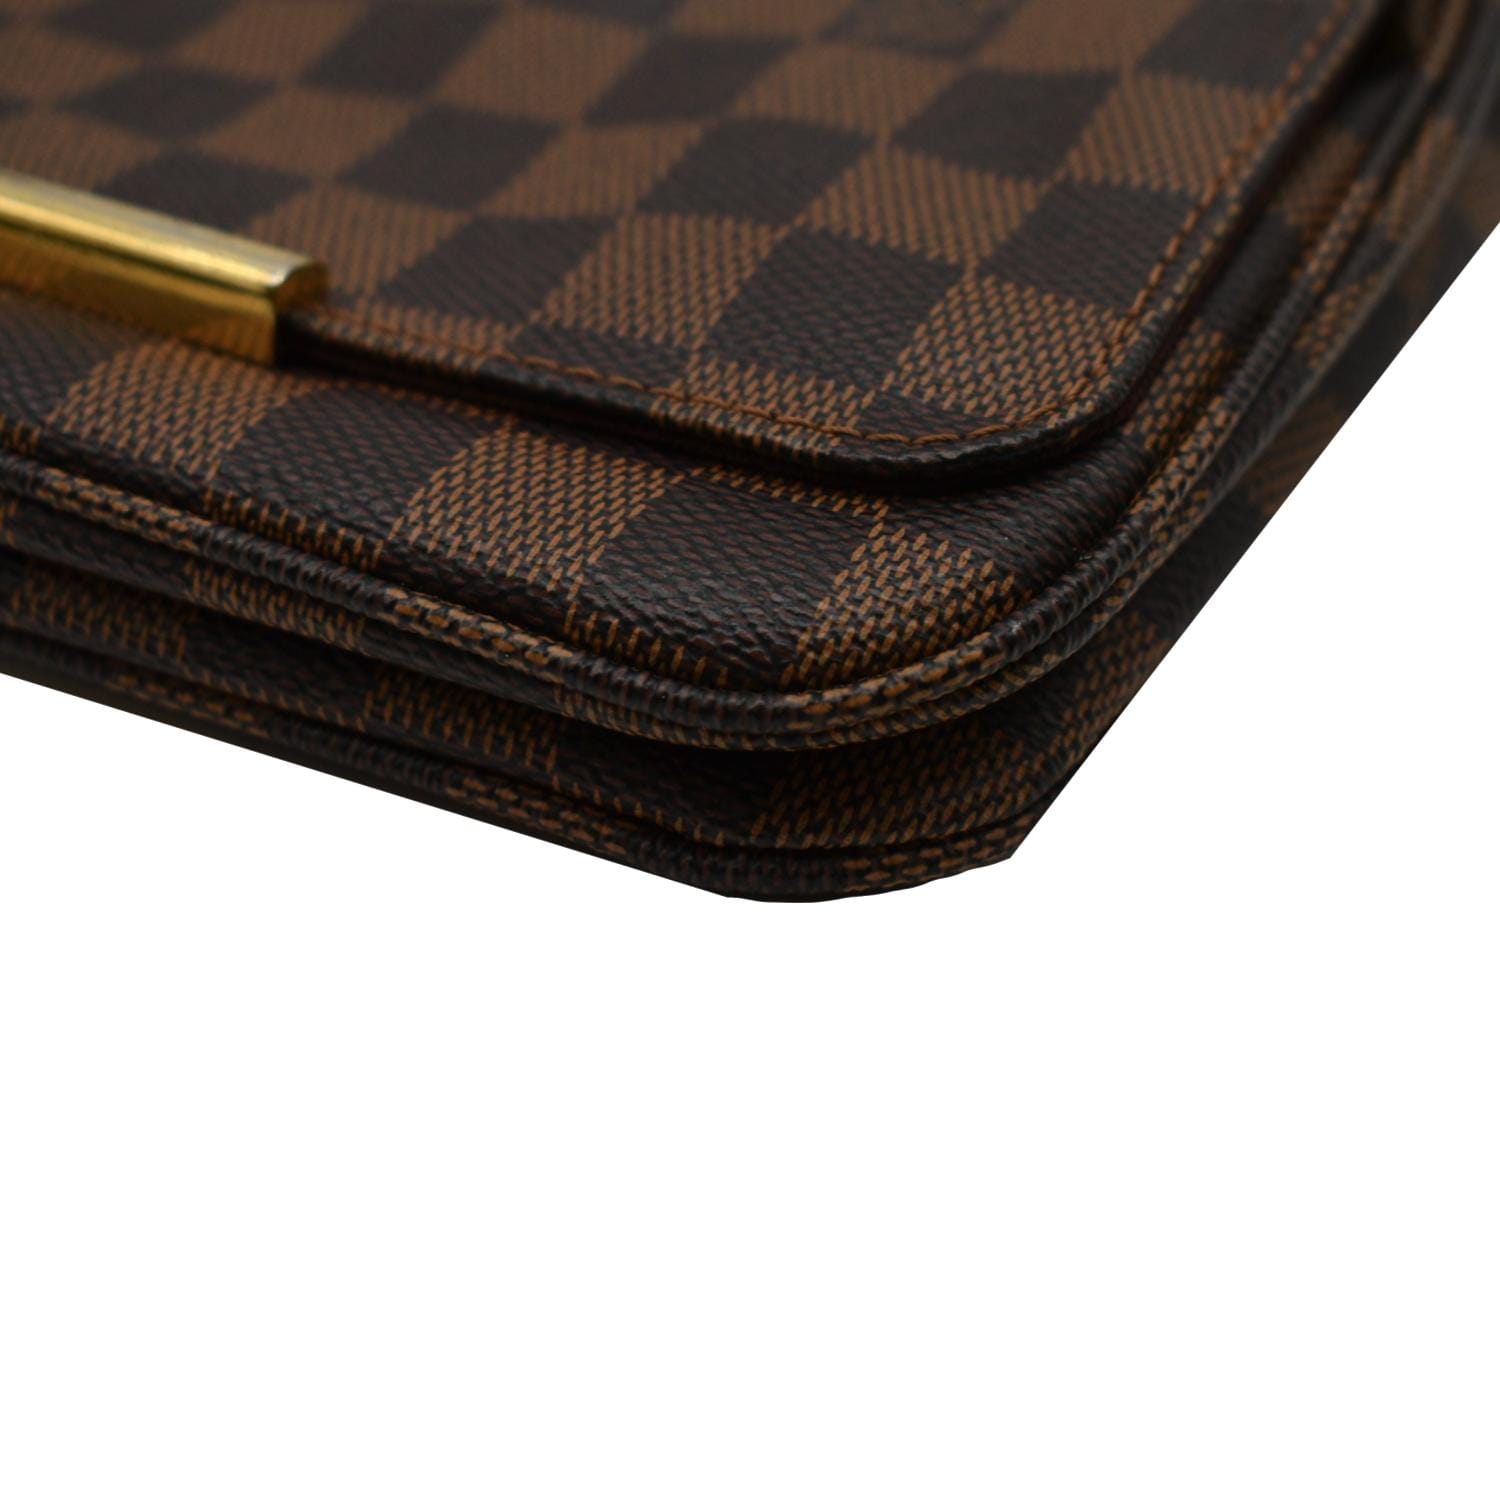 Louis Vuitton's 13 Laptop Sleeve Makes Me Very Glad That I Have